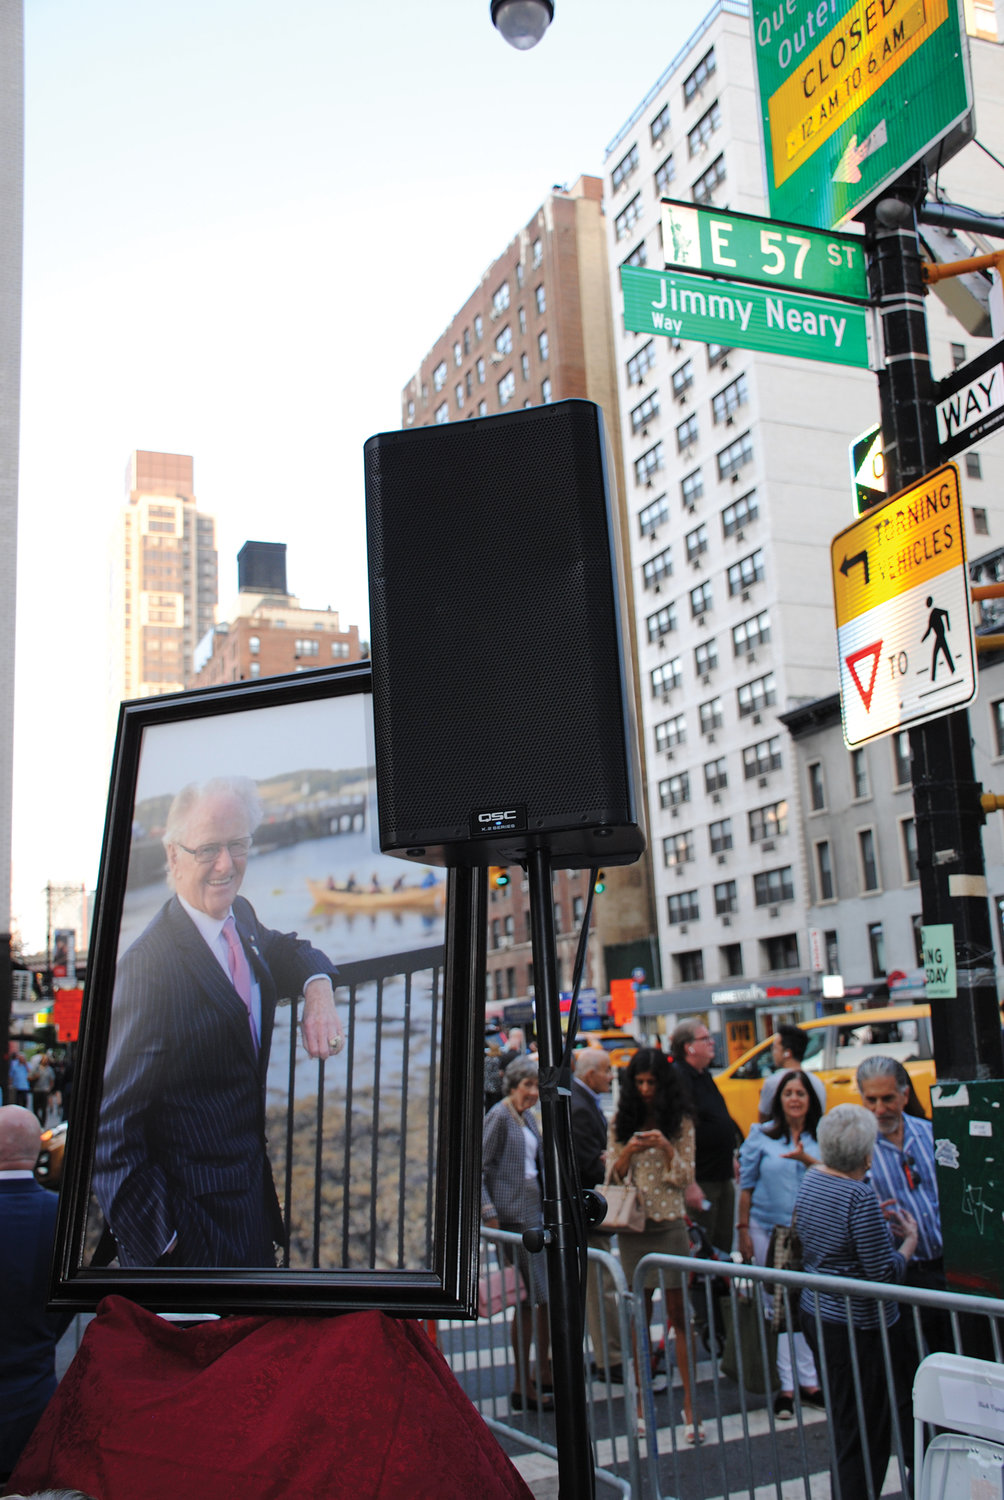 An image of Jimmy Neary overlooks the busy corner, a block from the New York Catholic Center.